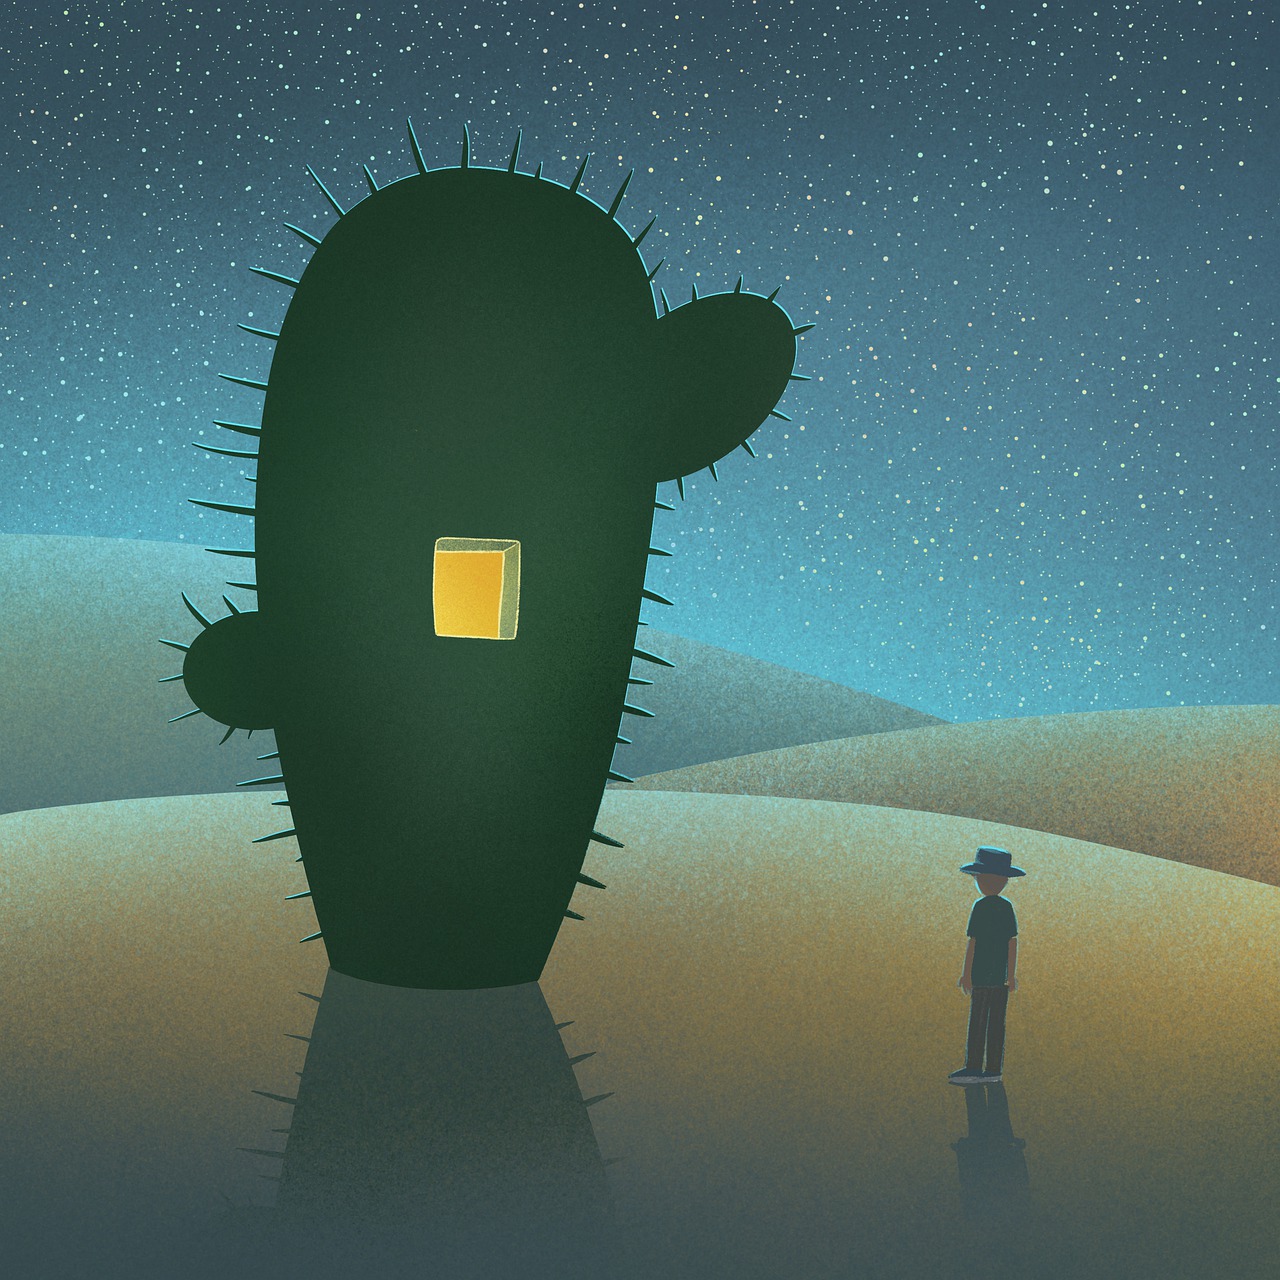 a person standing in front of a cactus plant, concept art, inspired by Quint Buchholz, pop surrealism, calm night. digital illustration, one - eyed monster, anthropomorphic silhouette, cel illustration